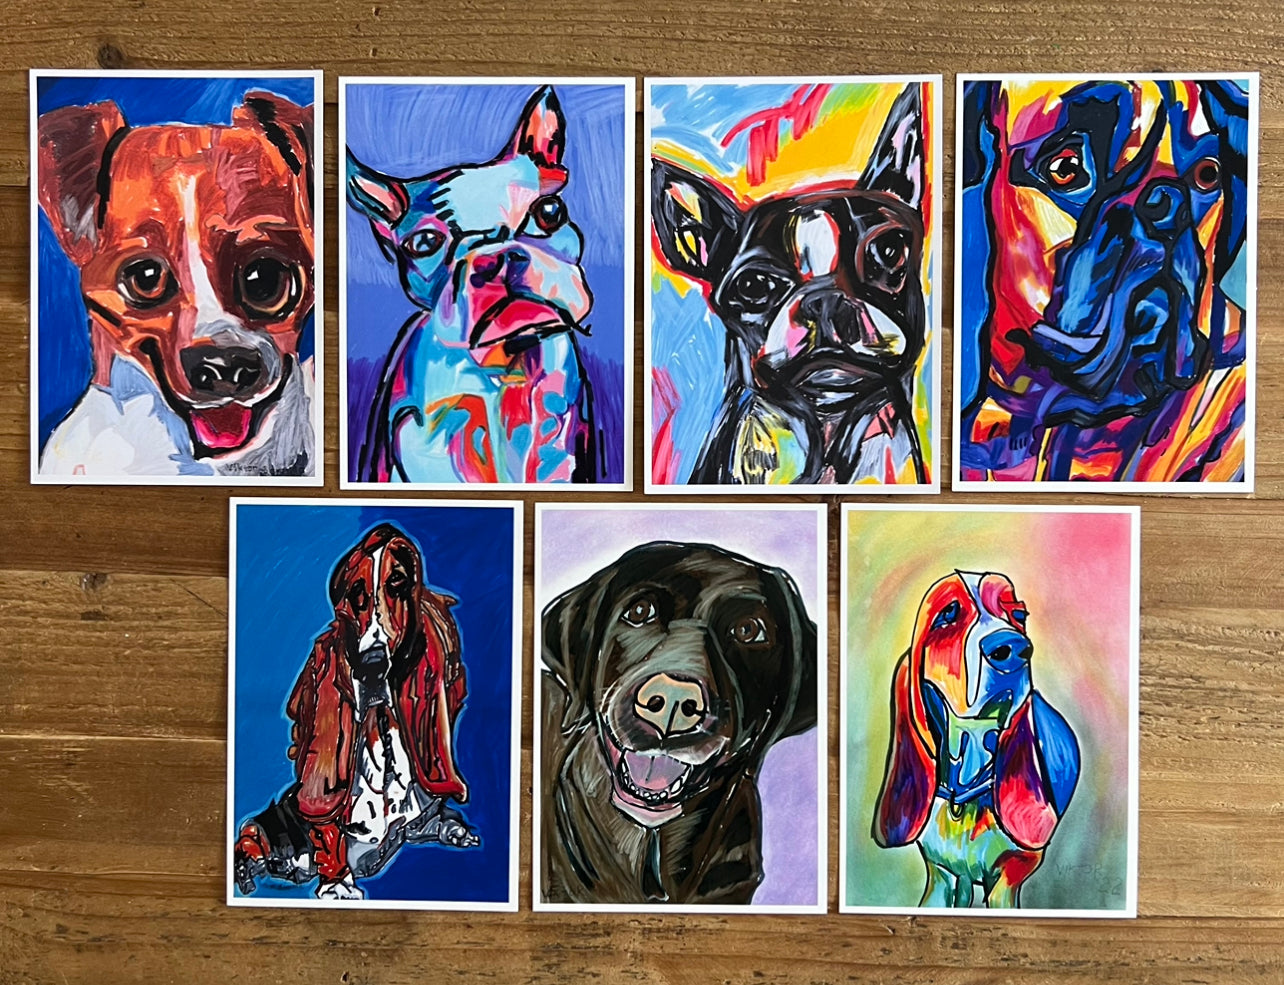 Unbeatable Deal: Get five 5x7" Prints for just $15 (more collections are available)